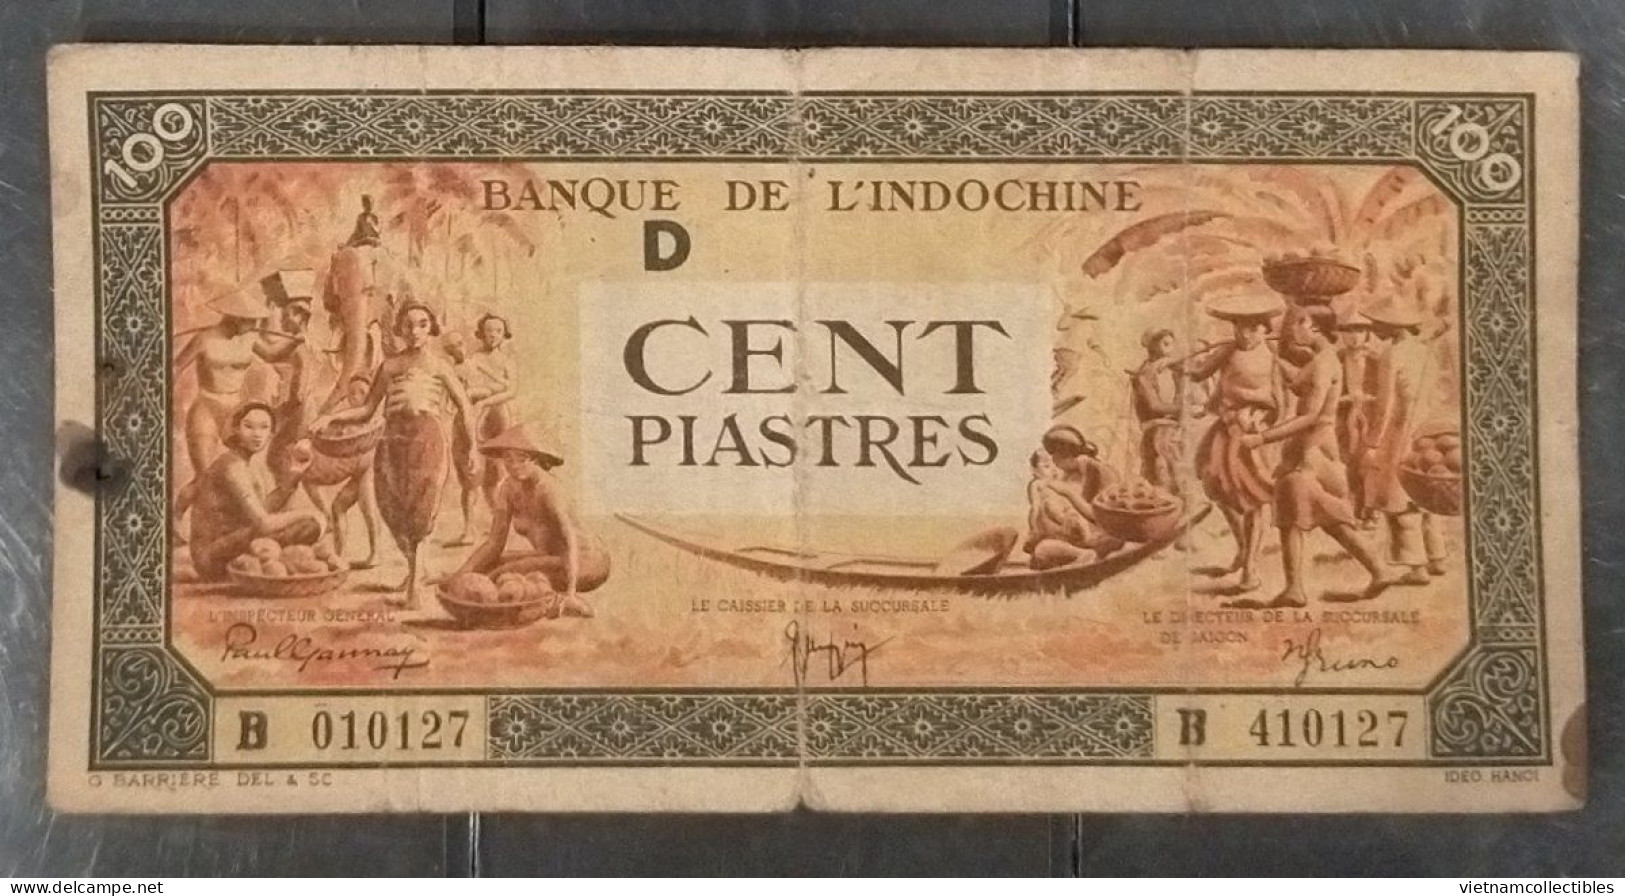 French Indochina Indochine Laos Vietnam Cambodia 100 Piastres Fine Banknote Note 1942-45 - Pick # 73 / 02 Photos - Indochina